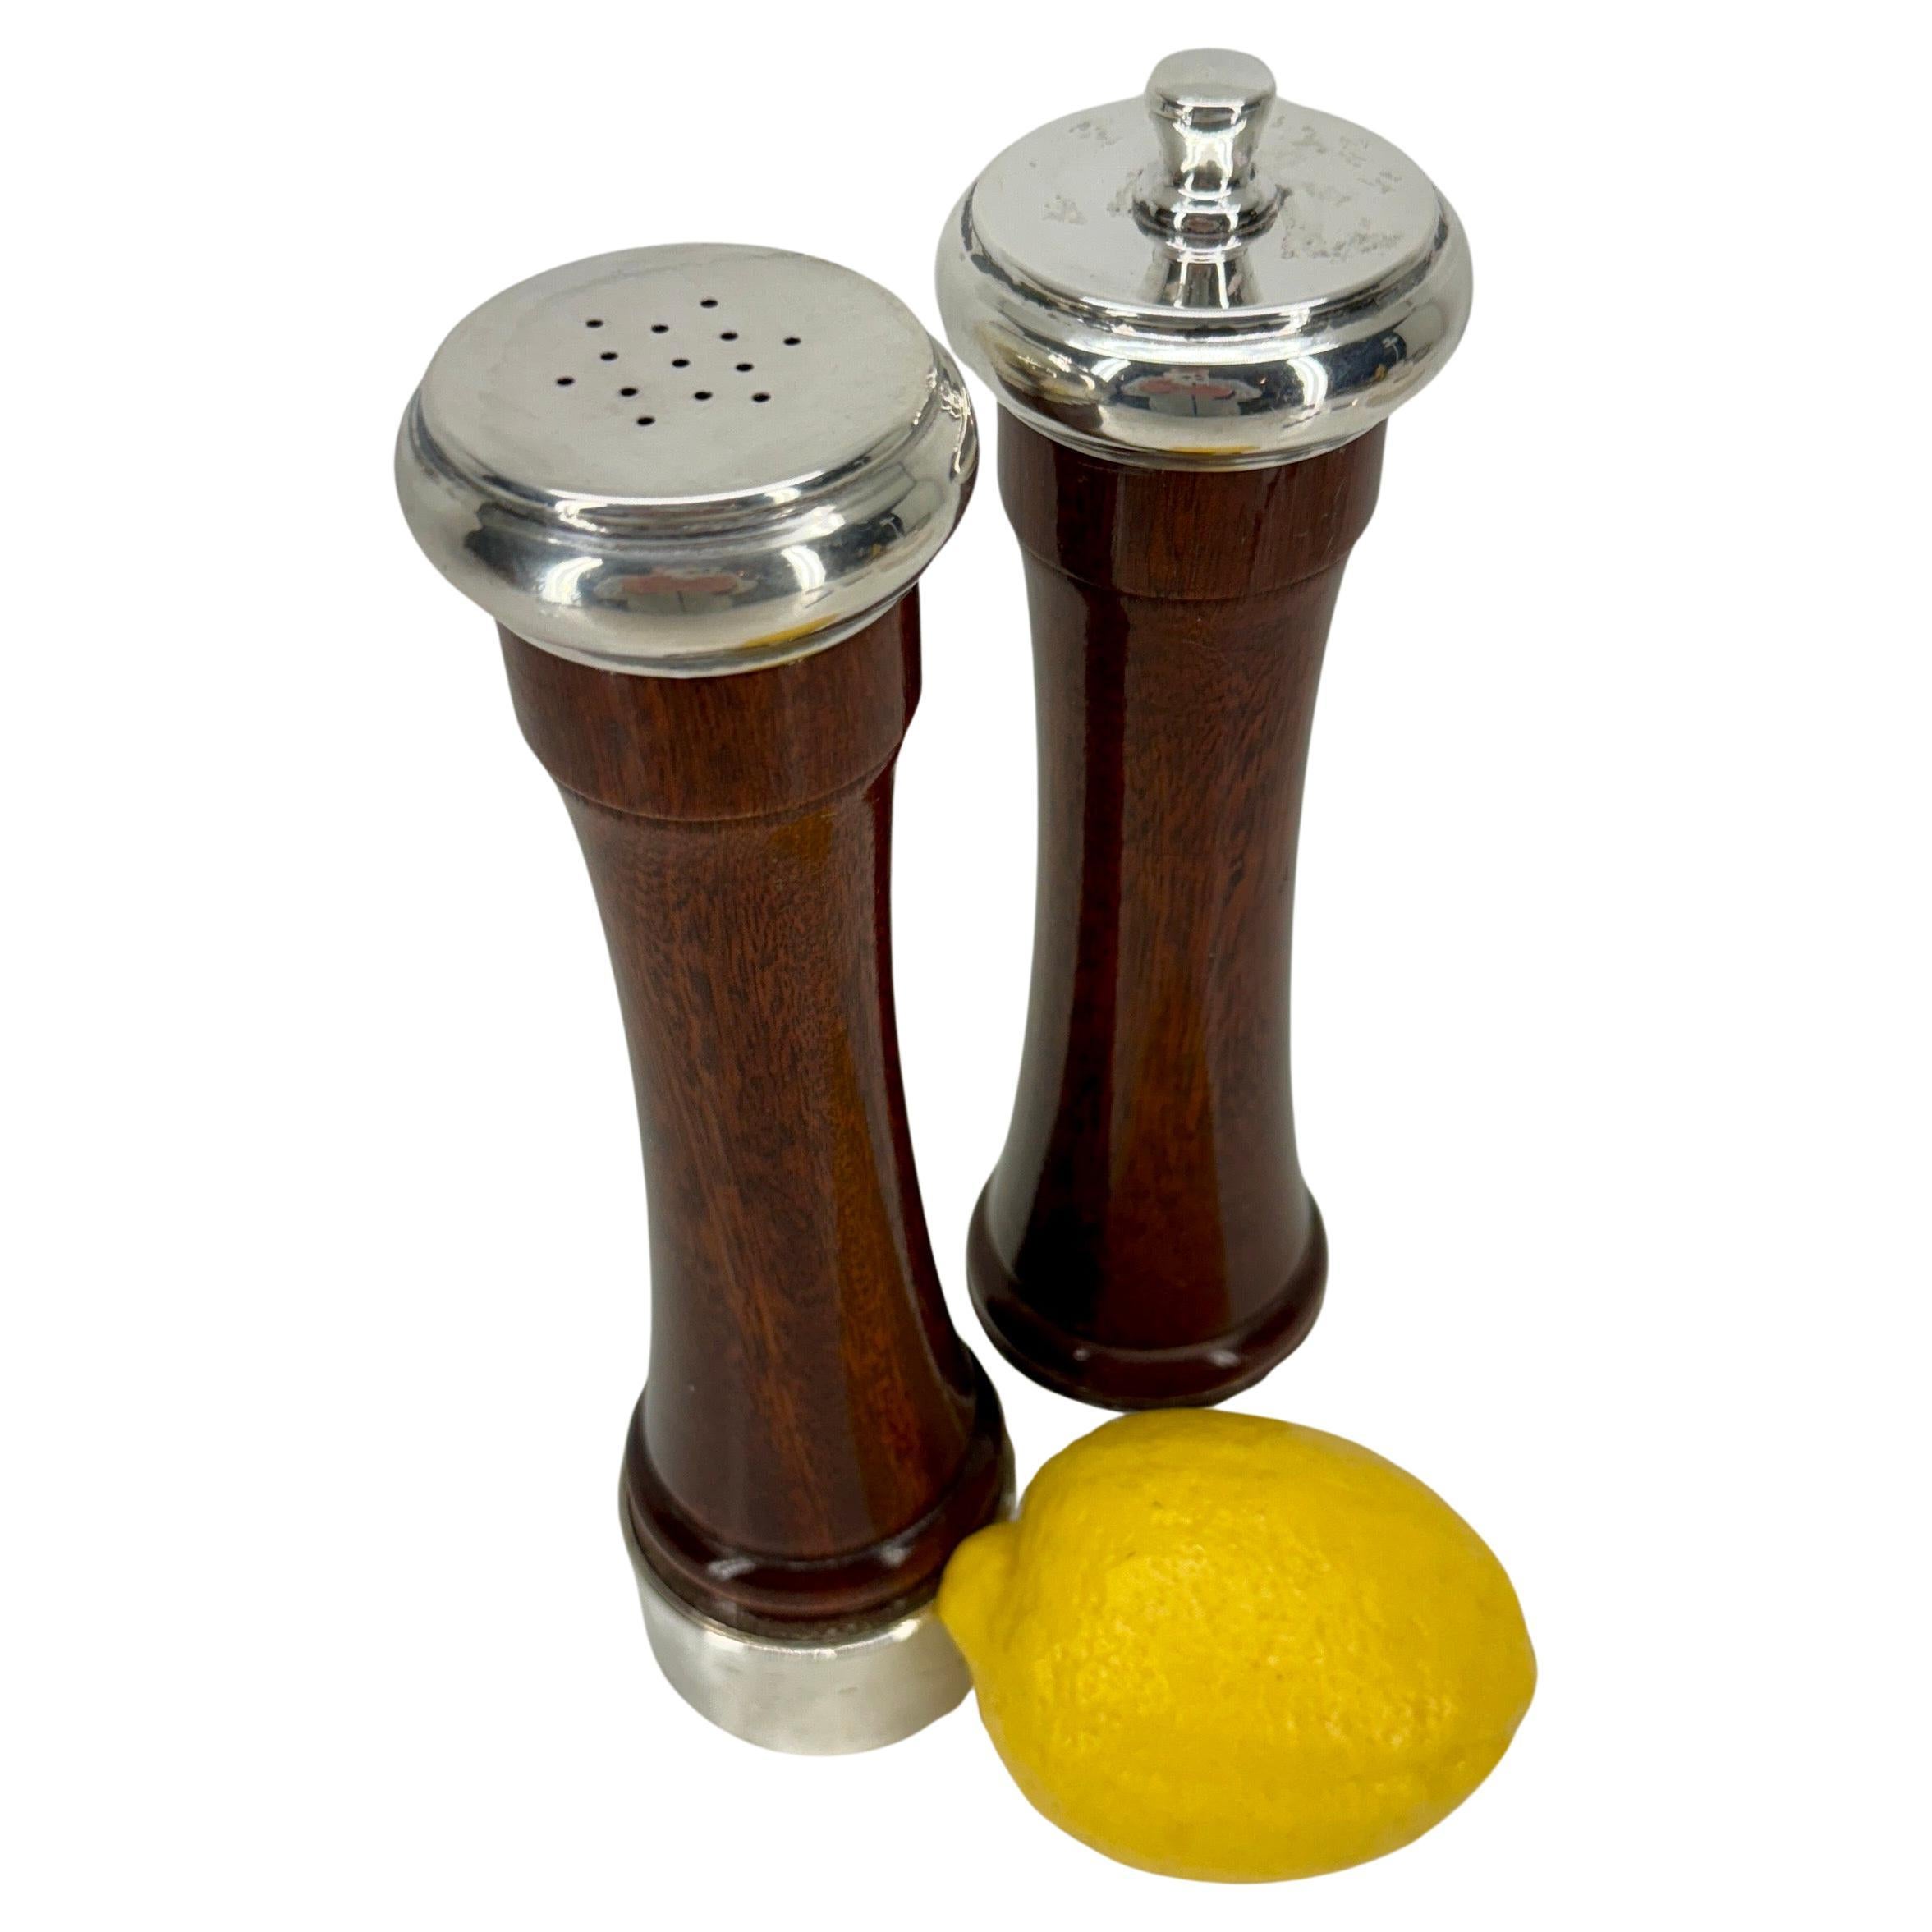 Set of Salt and Pepper Grinder Mills from Italy Made in Sterling Silver and Lacquered Wood.
The set is marked Sterling Silver and Made in Italy
